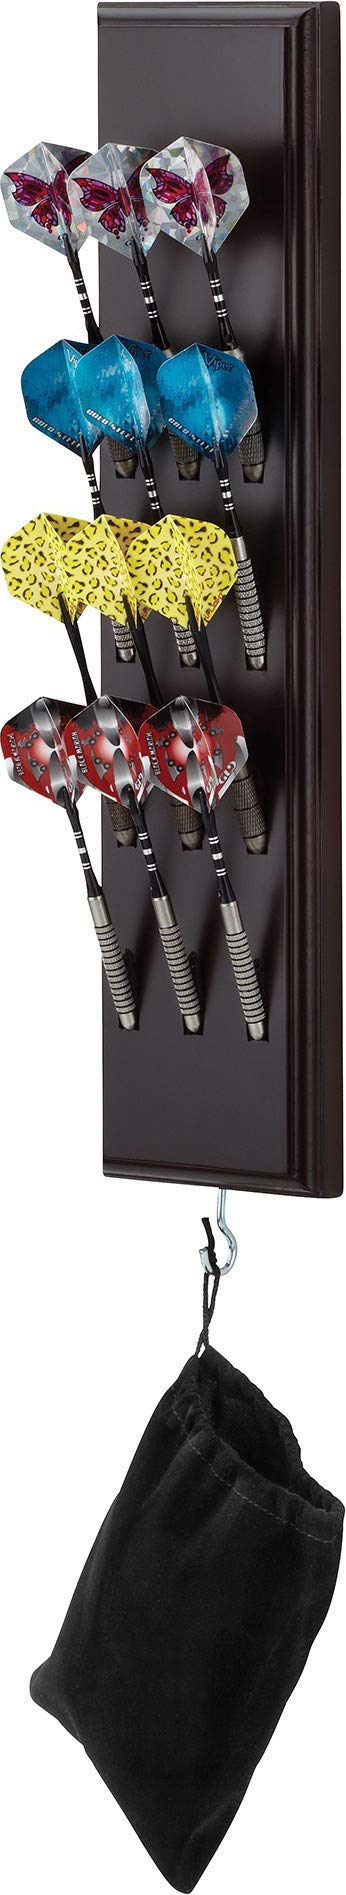 [AUSTRALIA] - Viper Dart Caddy Solid Wood Wall Mounted Dart Holder/Stand with Accessory Storage Bag, Displays 4 Sets of Steel/Soft Tip Darts, Compatible with All Sisal & Electronic Dartboards, Surrounds & Cabinets Mahogany Finish 